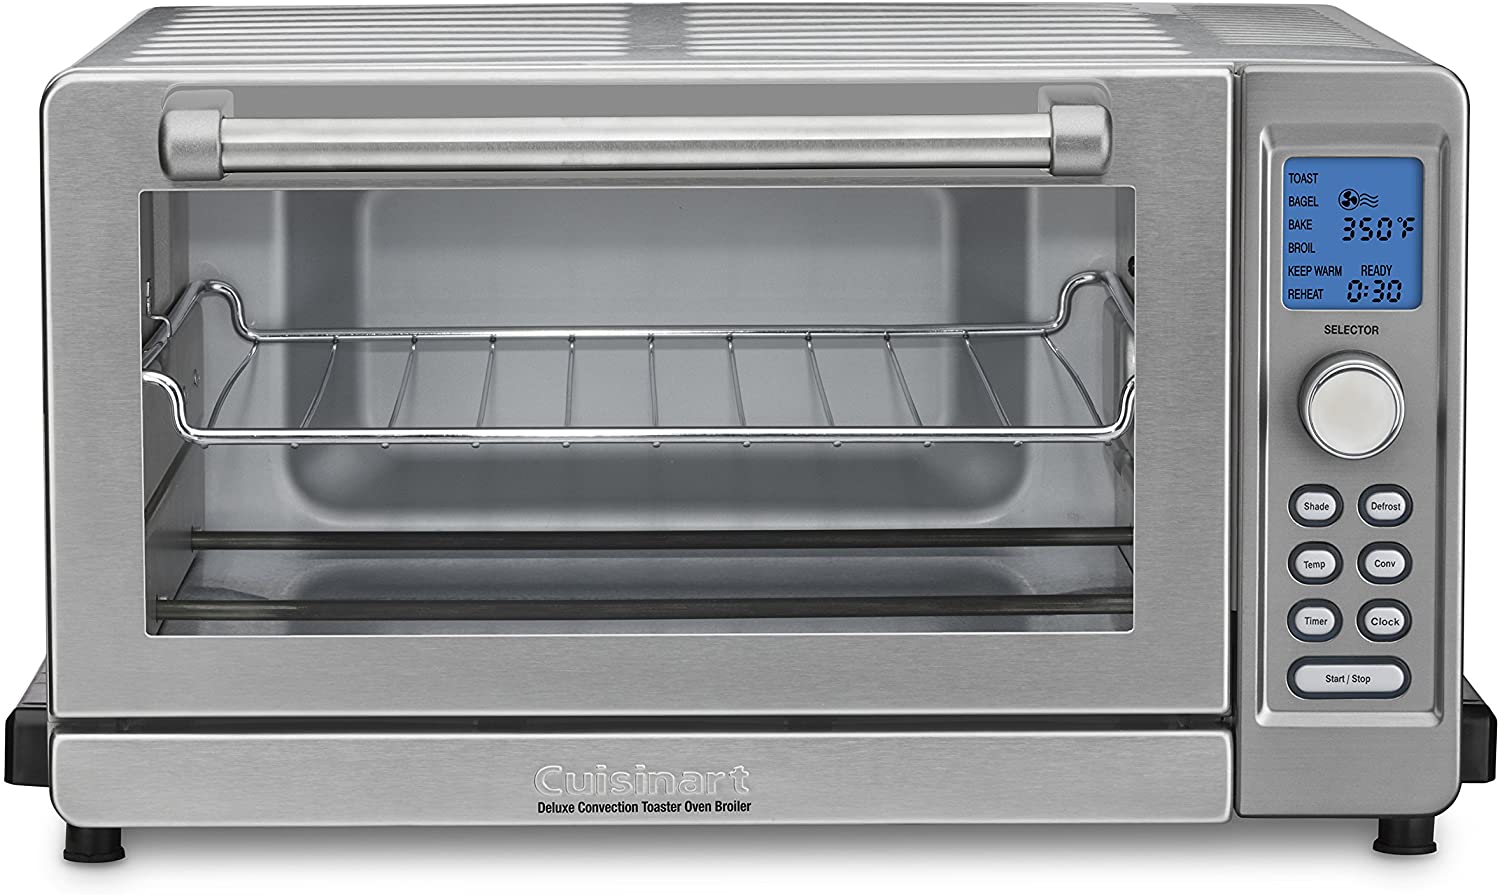 Cuisinart TOB-135FR Convection Toaster Oven Broiler - Certified Refurbished